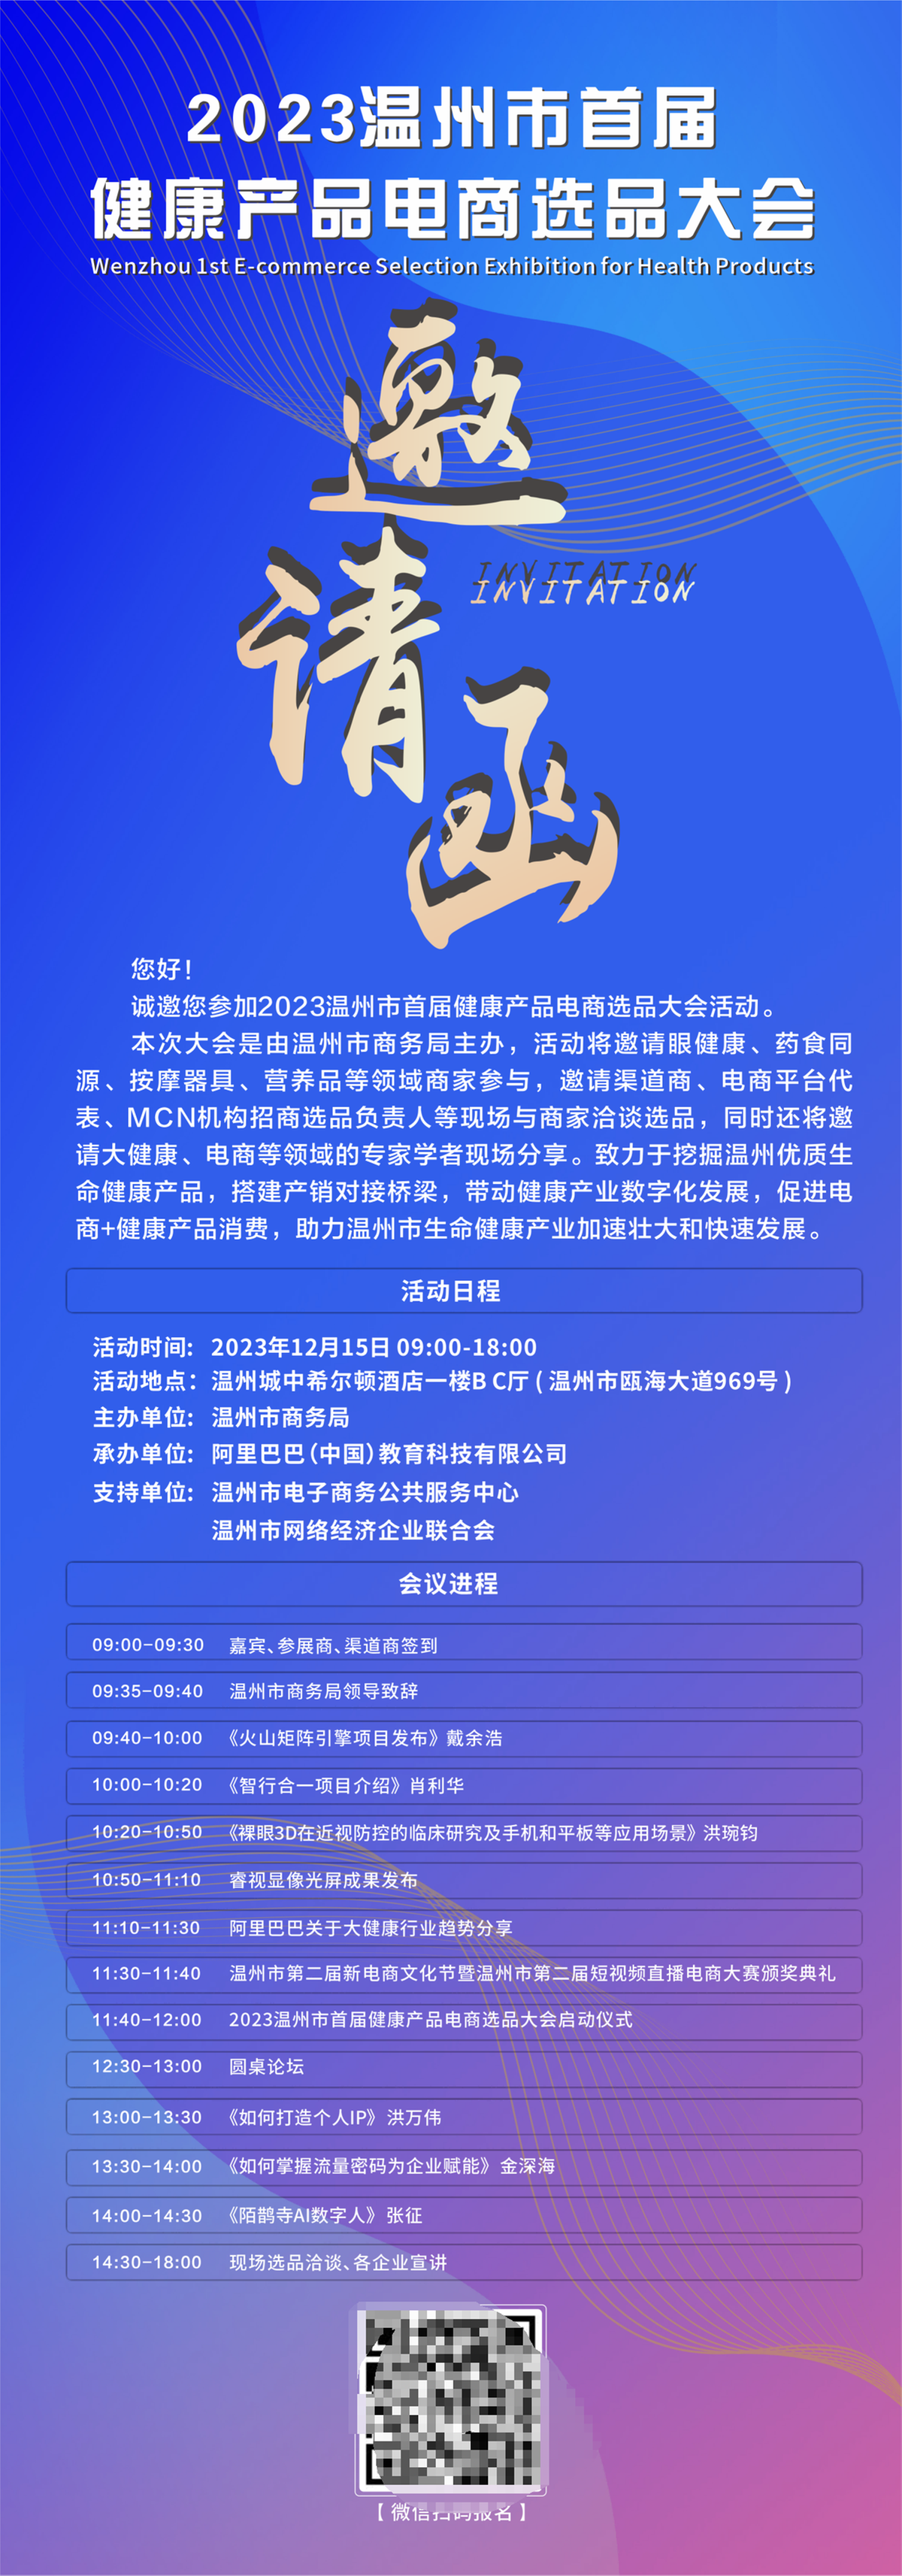 2023 Wenzhou's first health product e -commerce selection conference invites you to join the event